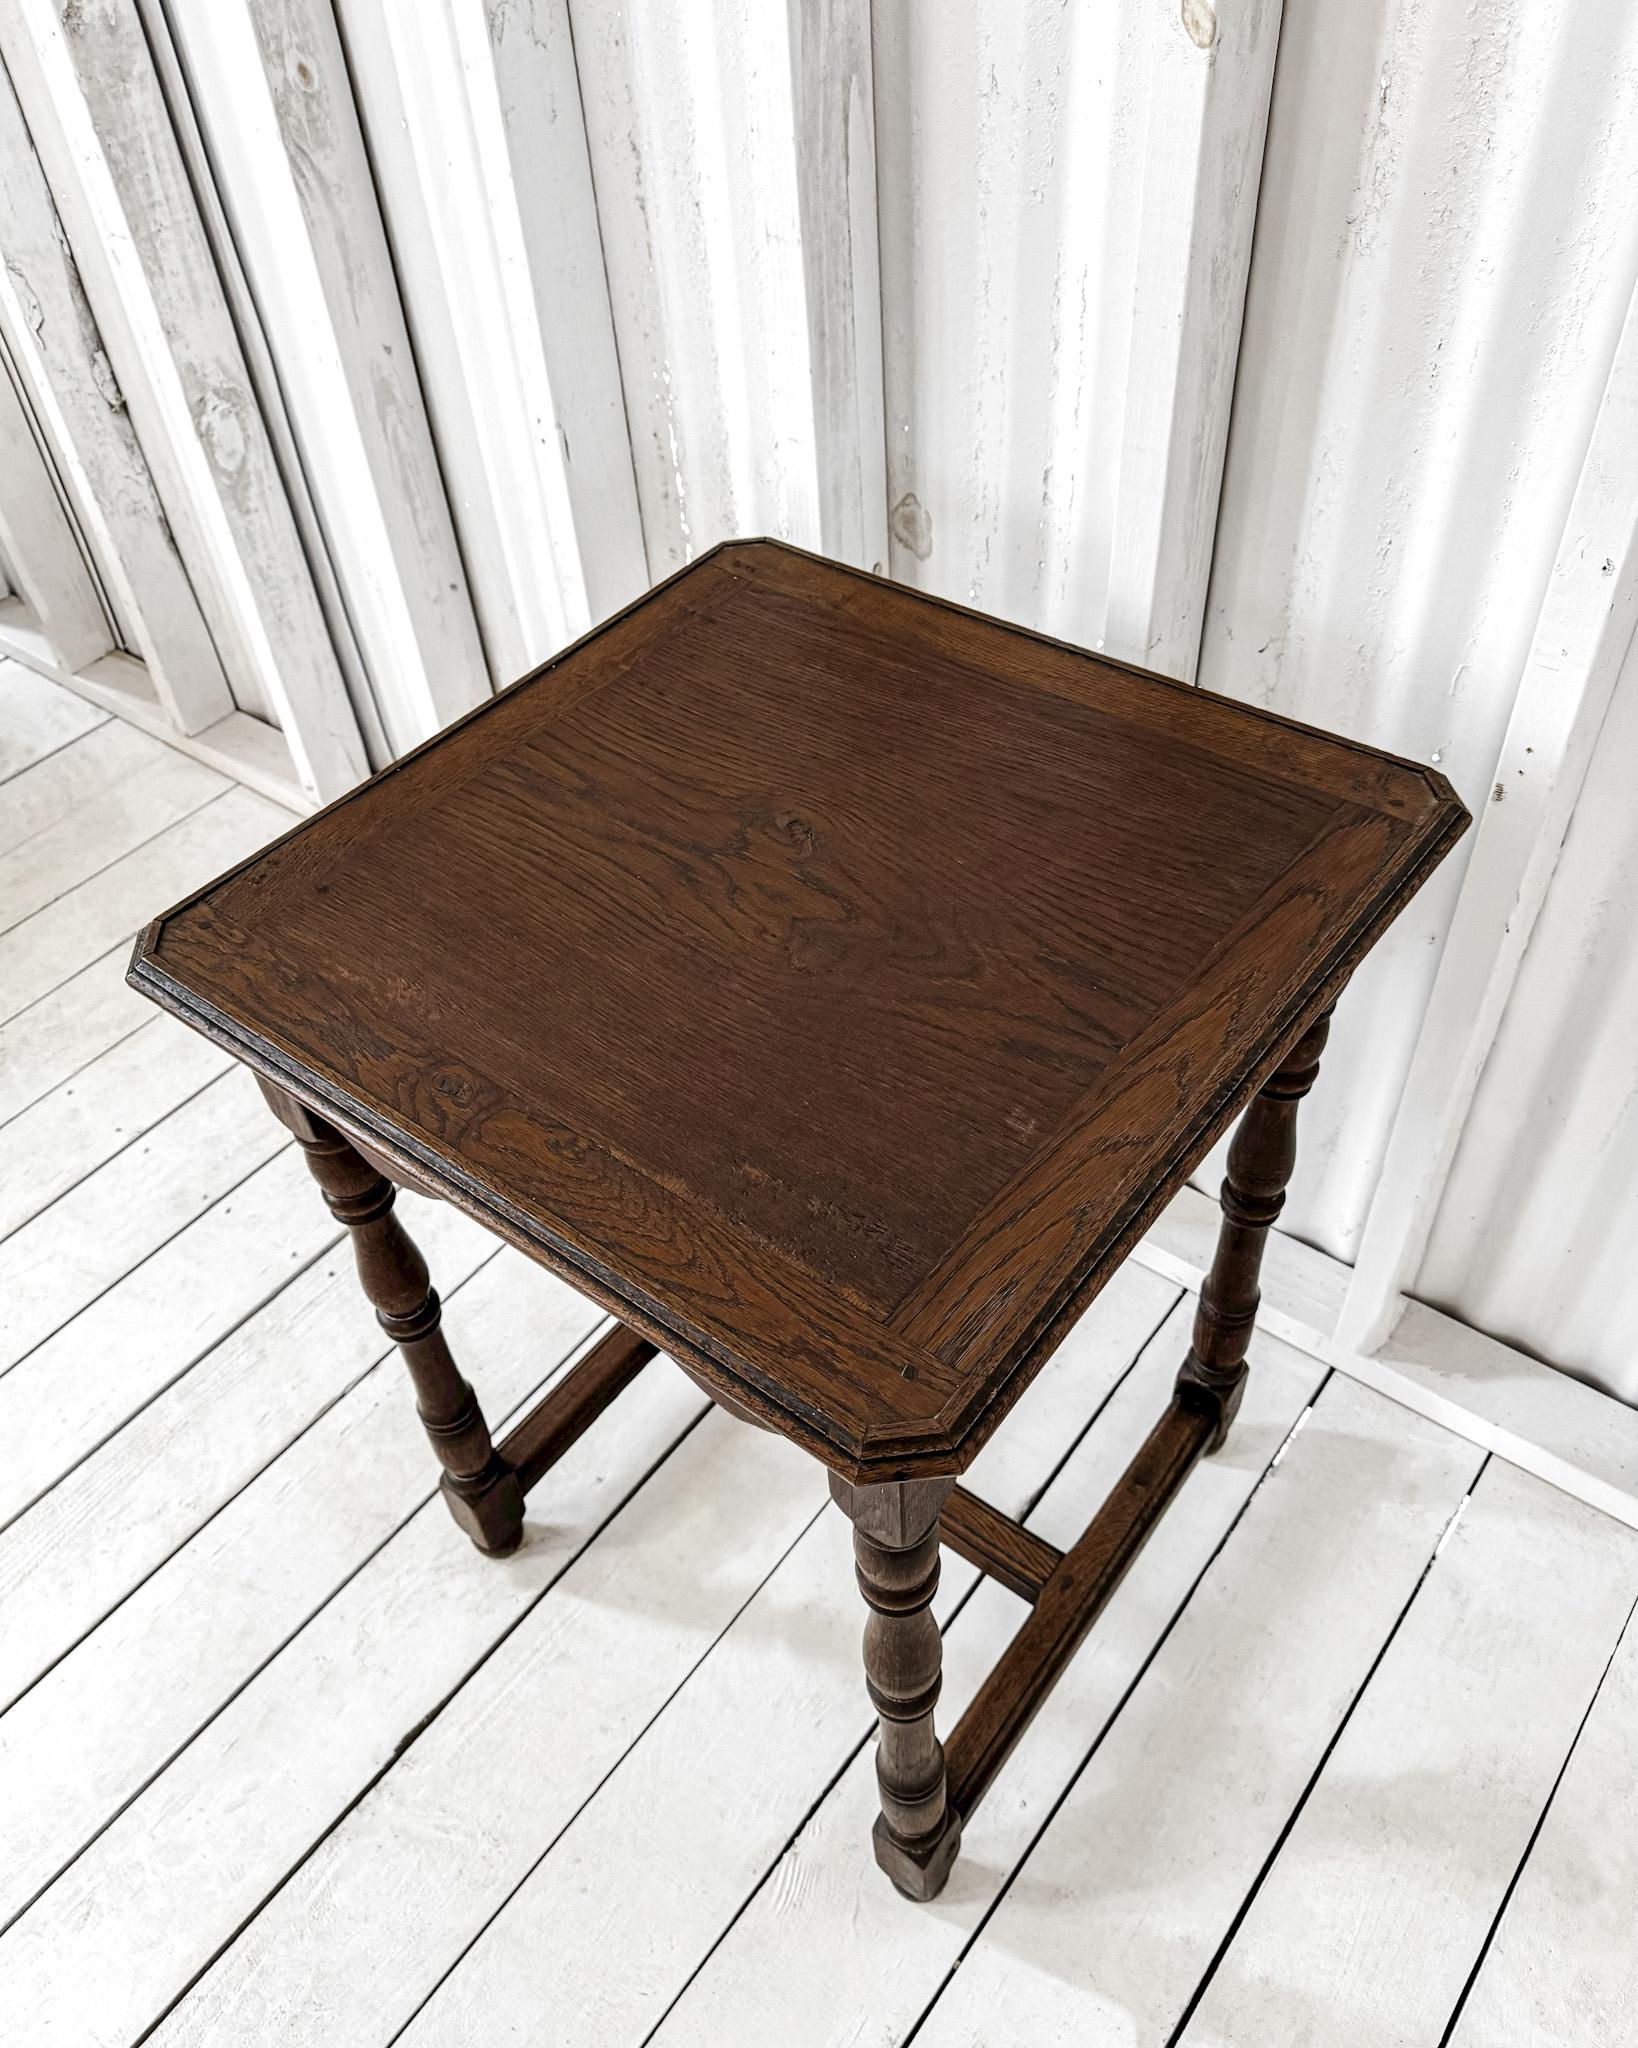 19th Century English Trestle Base Accent Table with Dark Stain For Sale 6